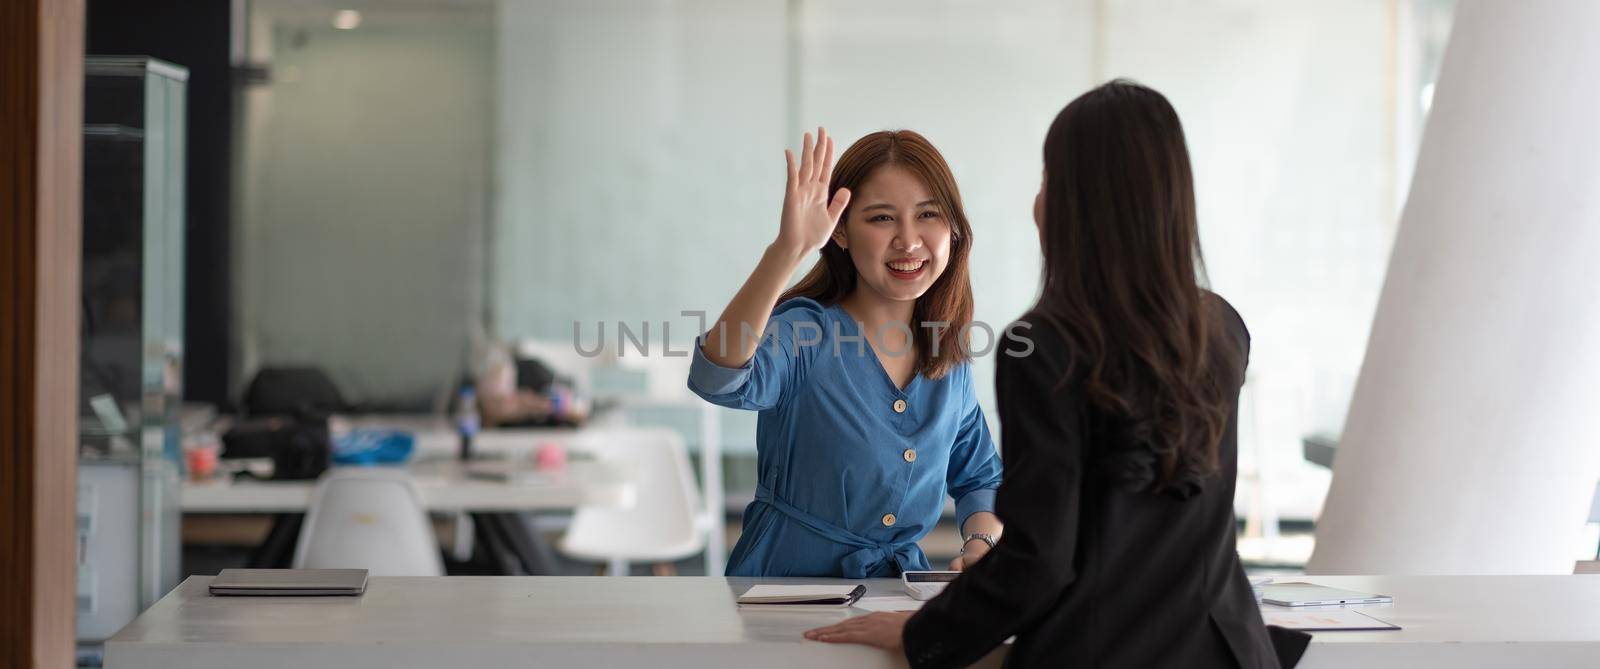 businesswomen giving hi five touching hands and thumb up during meeting for celebration business achievement and success with teamwork.